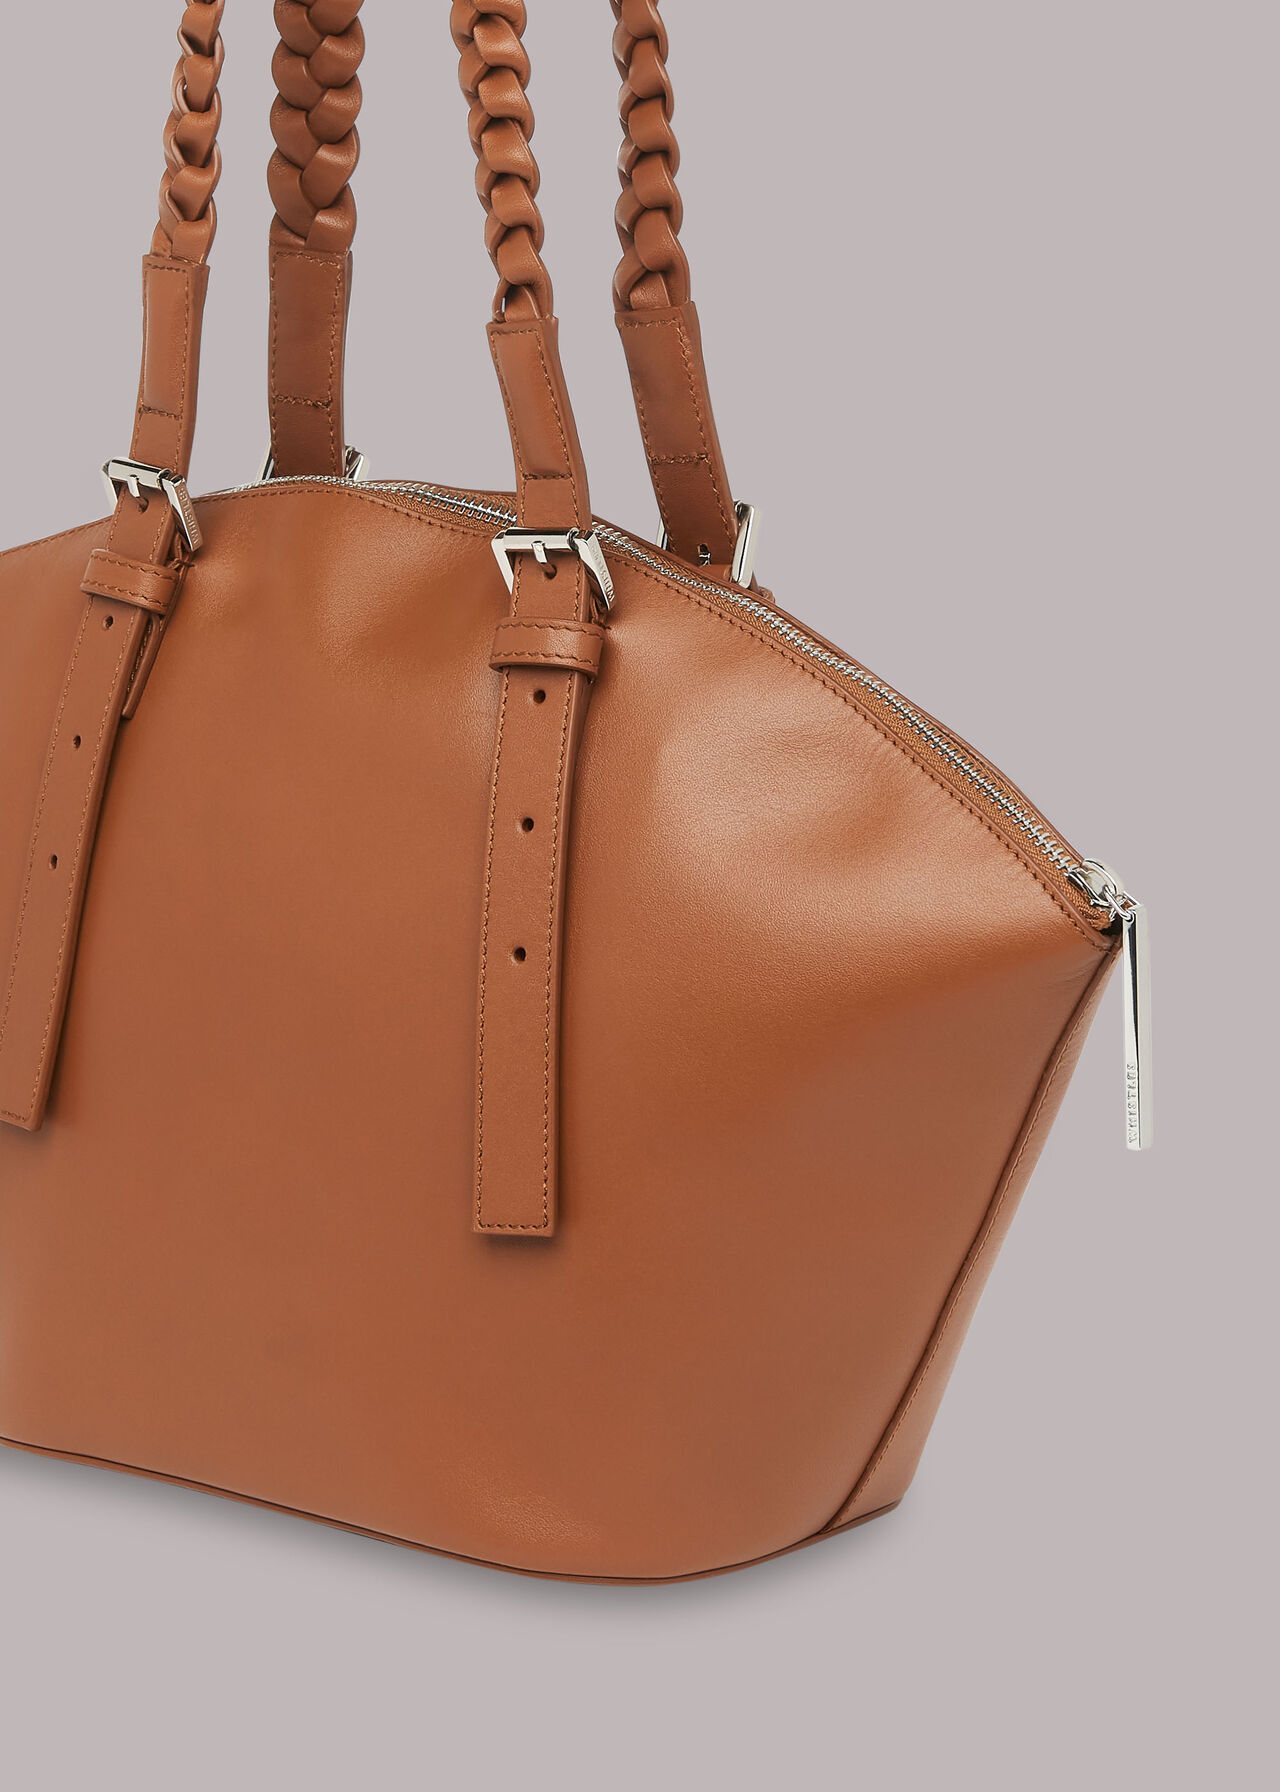 Tan Denmark Unlined Leather Tote, WHISTLES